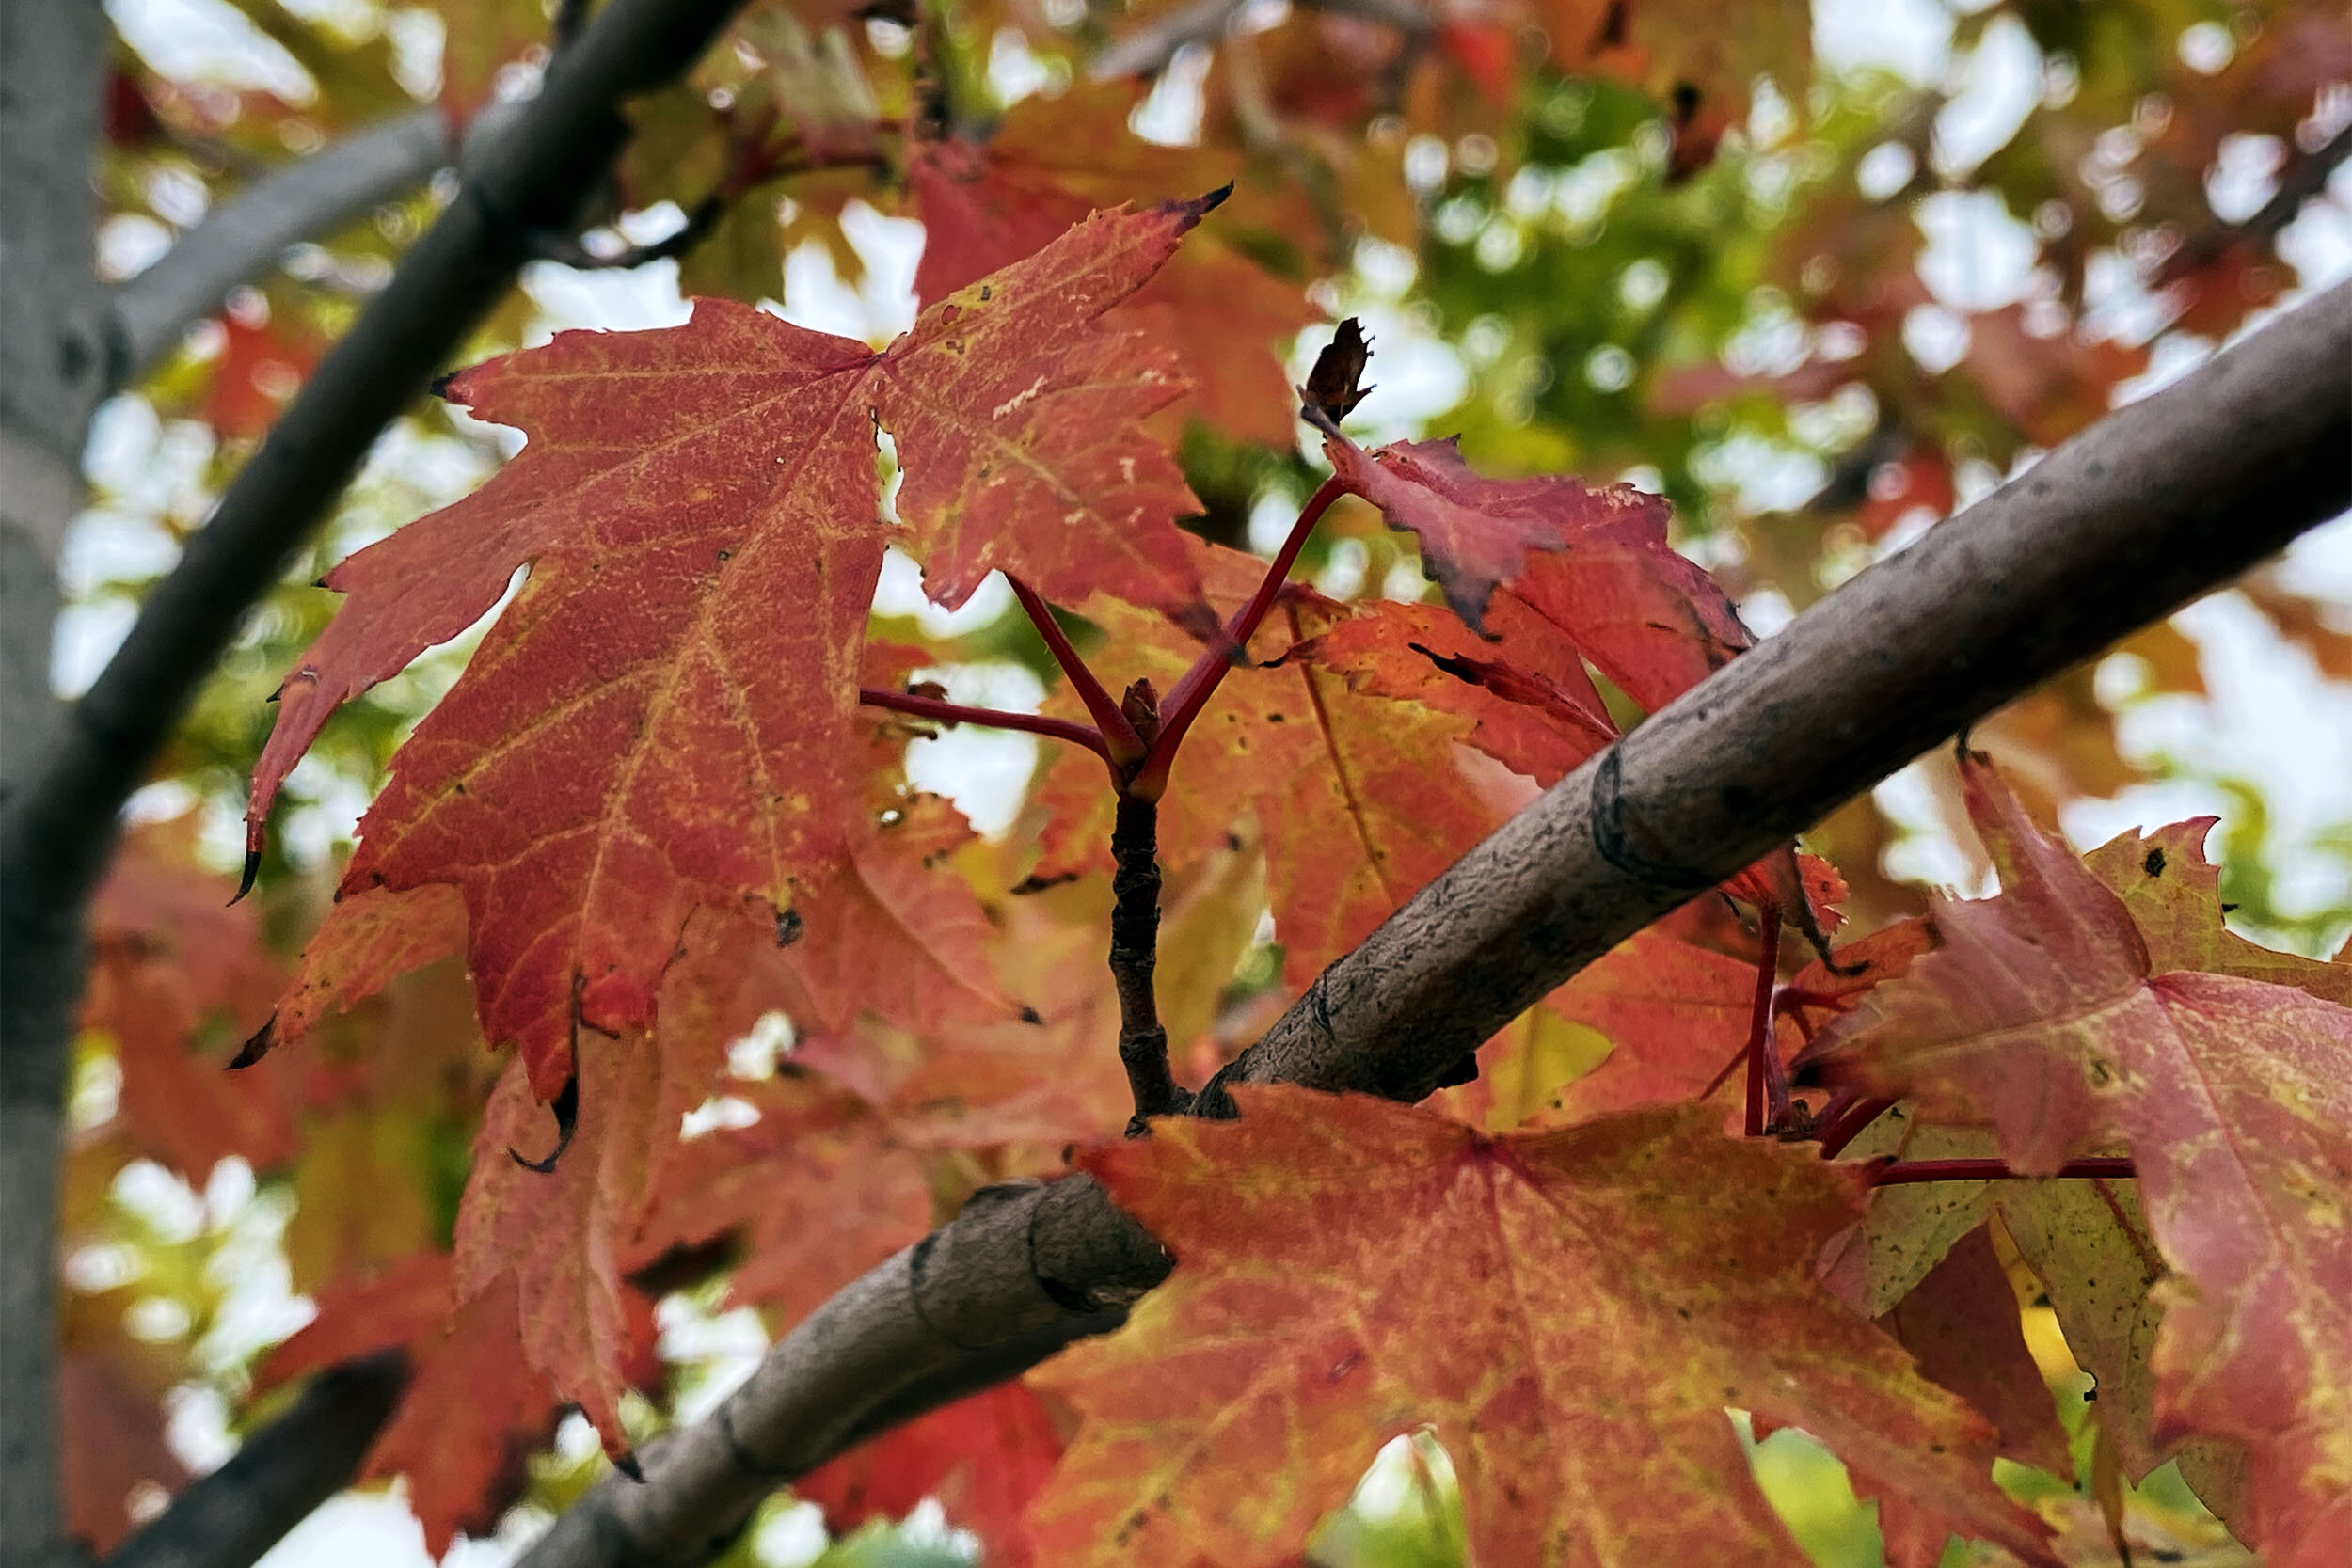 Each genus of tree has a characteristic fall color